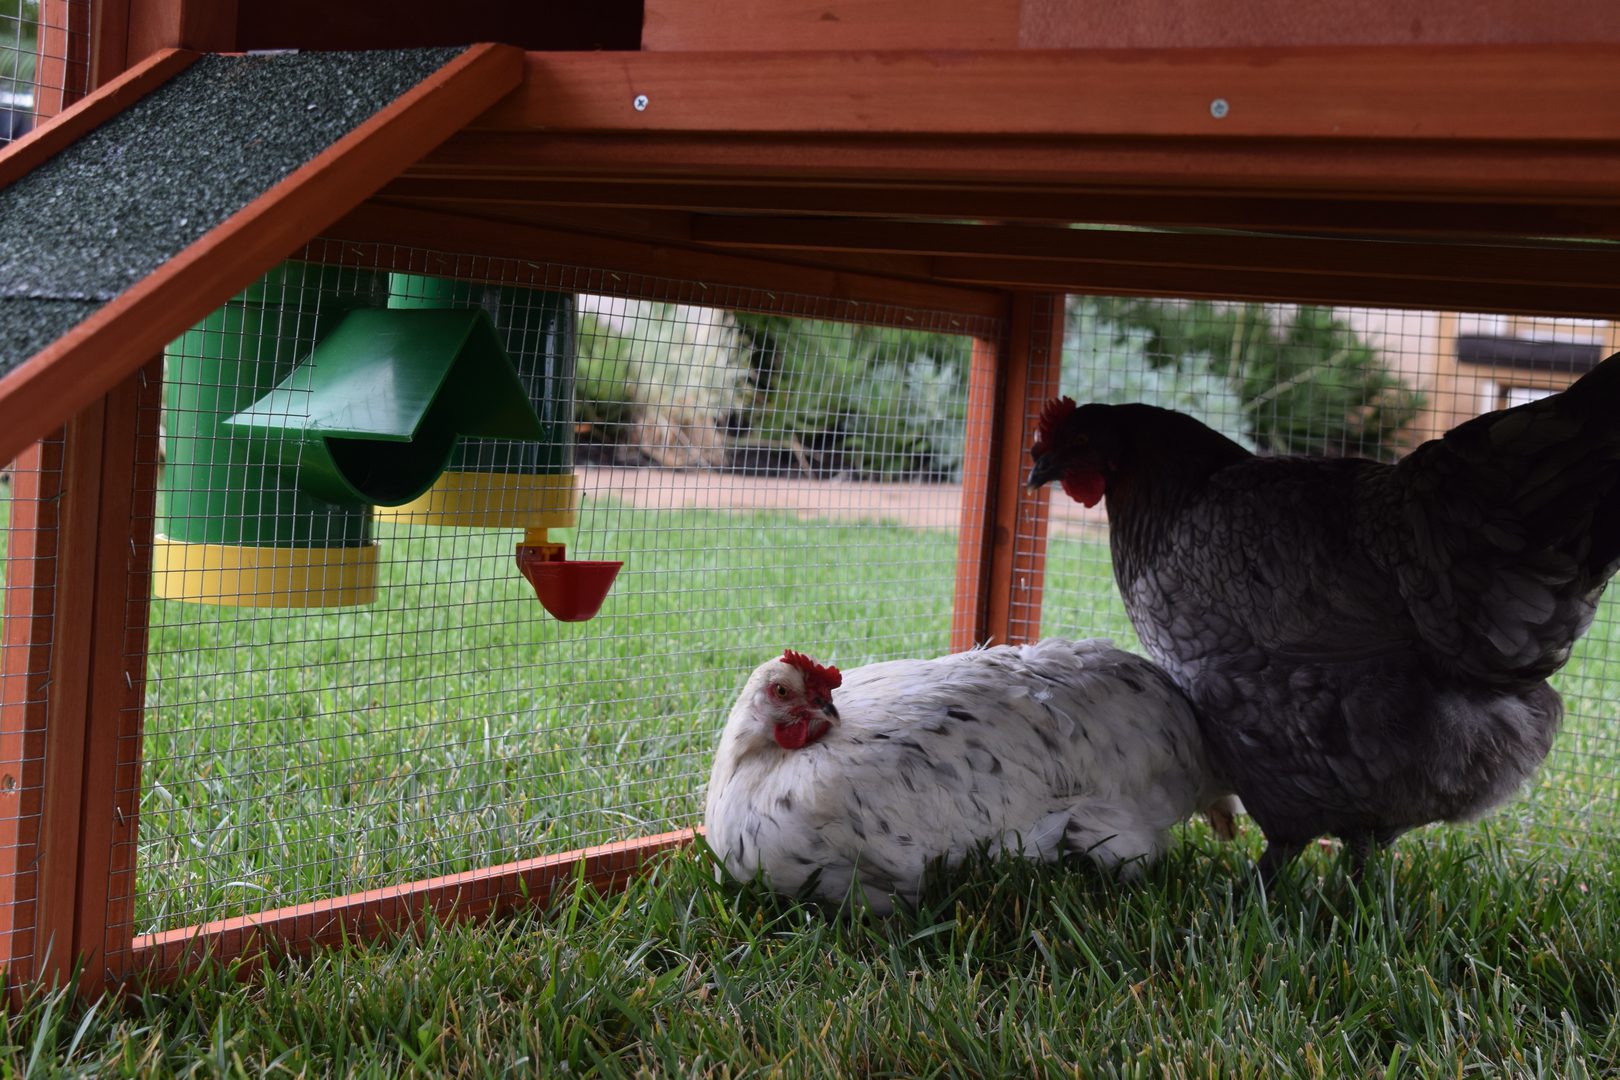 Two chickens in a coop with a poultry feeder